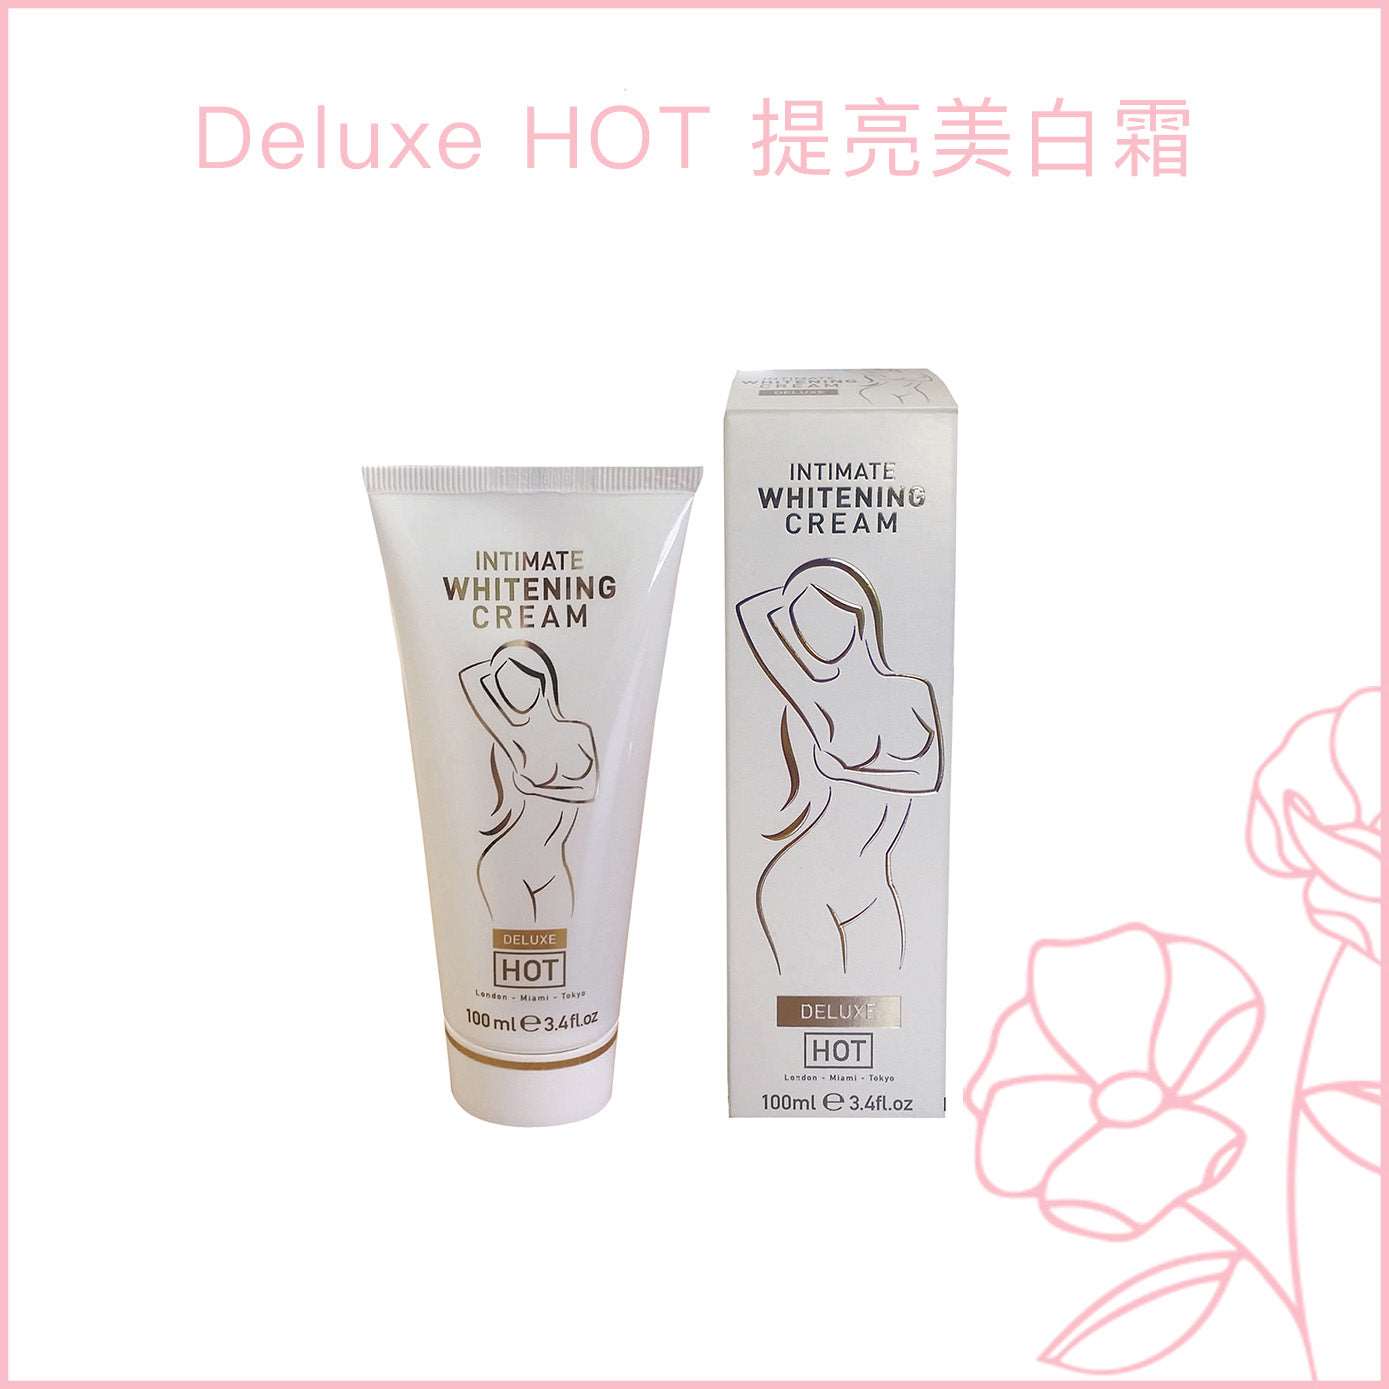 Deluxe HOT 提亮美白霜